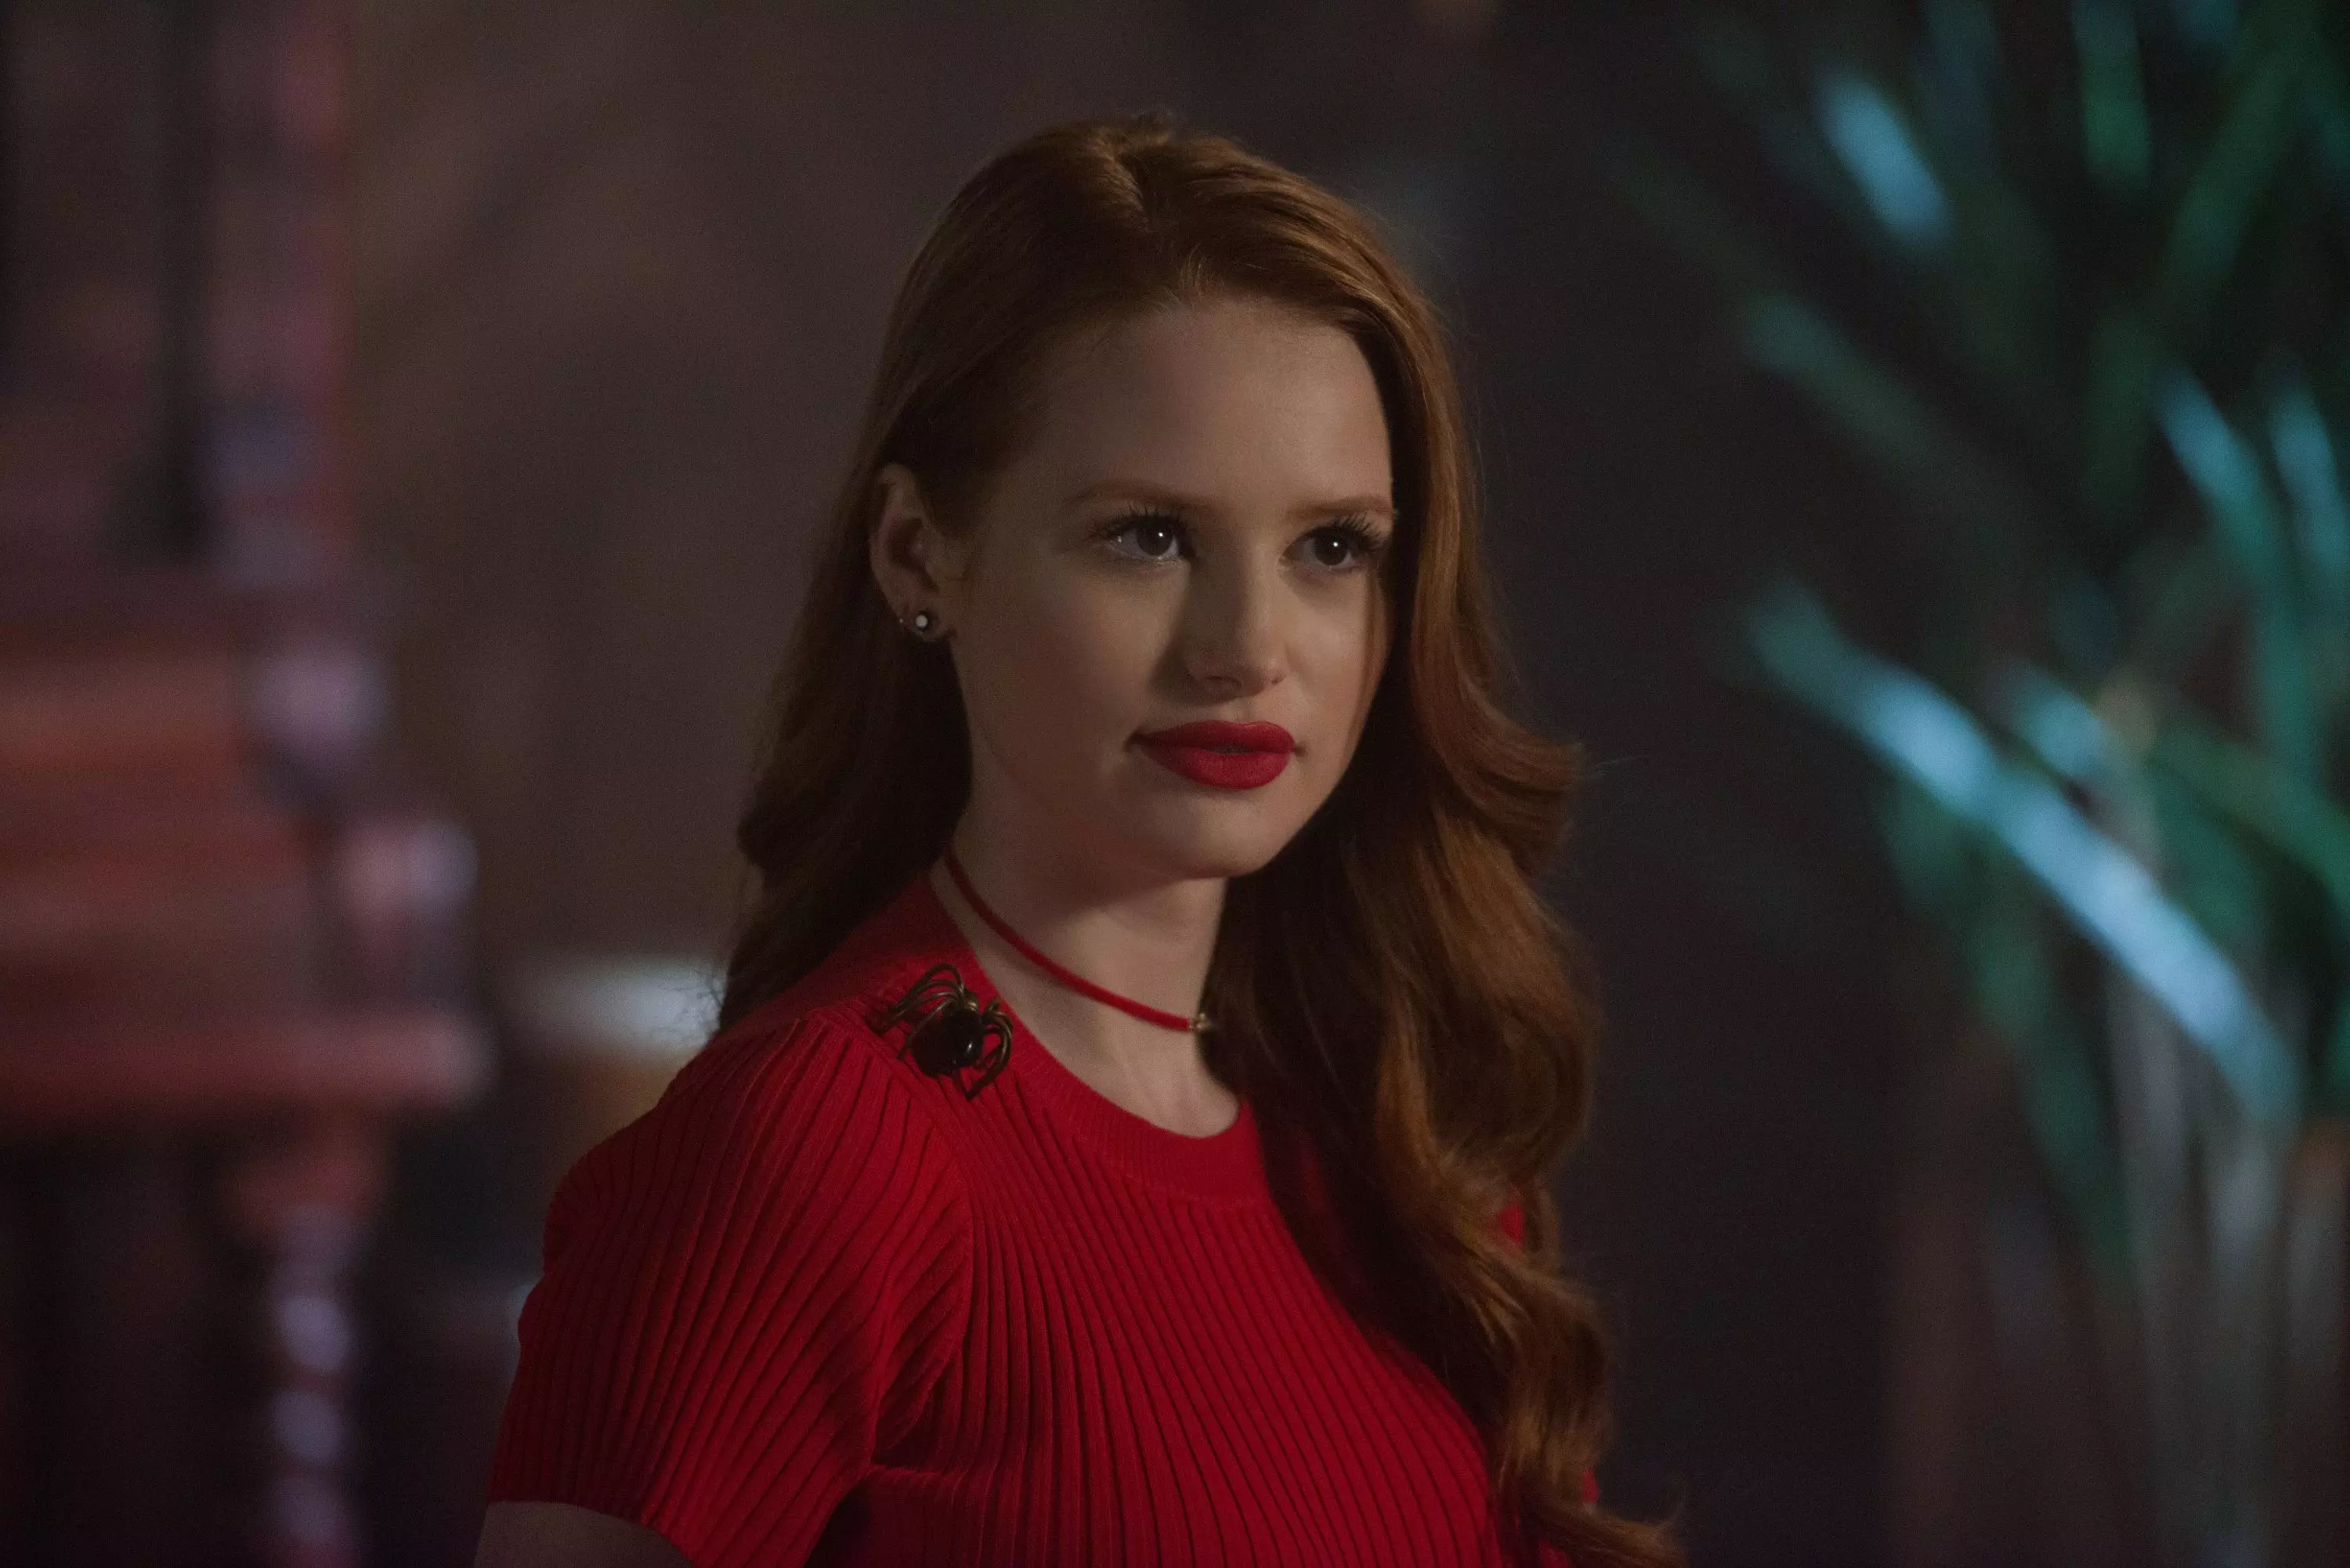 Cheryl Blossom has been made to think she's going mad this season by her cruel mother in hiding (